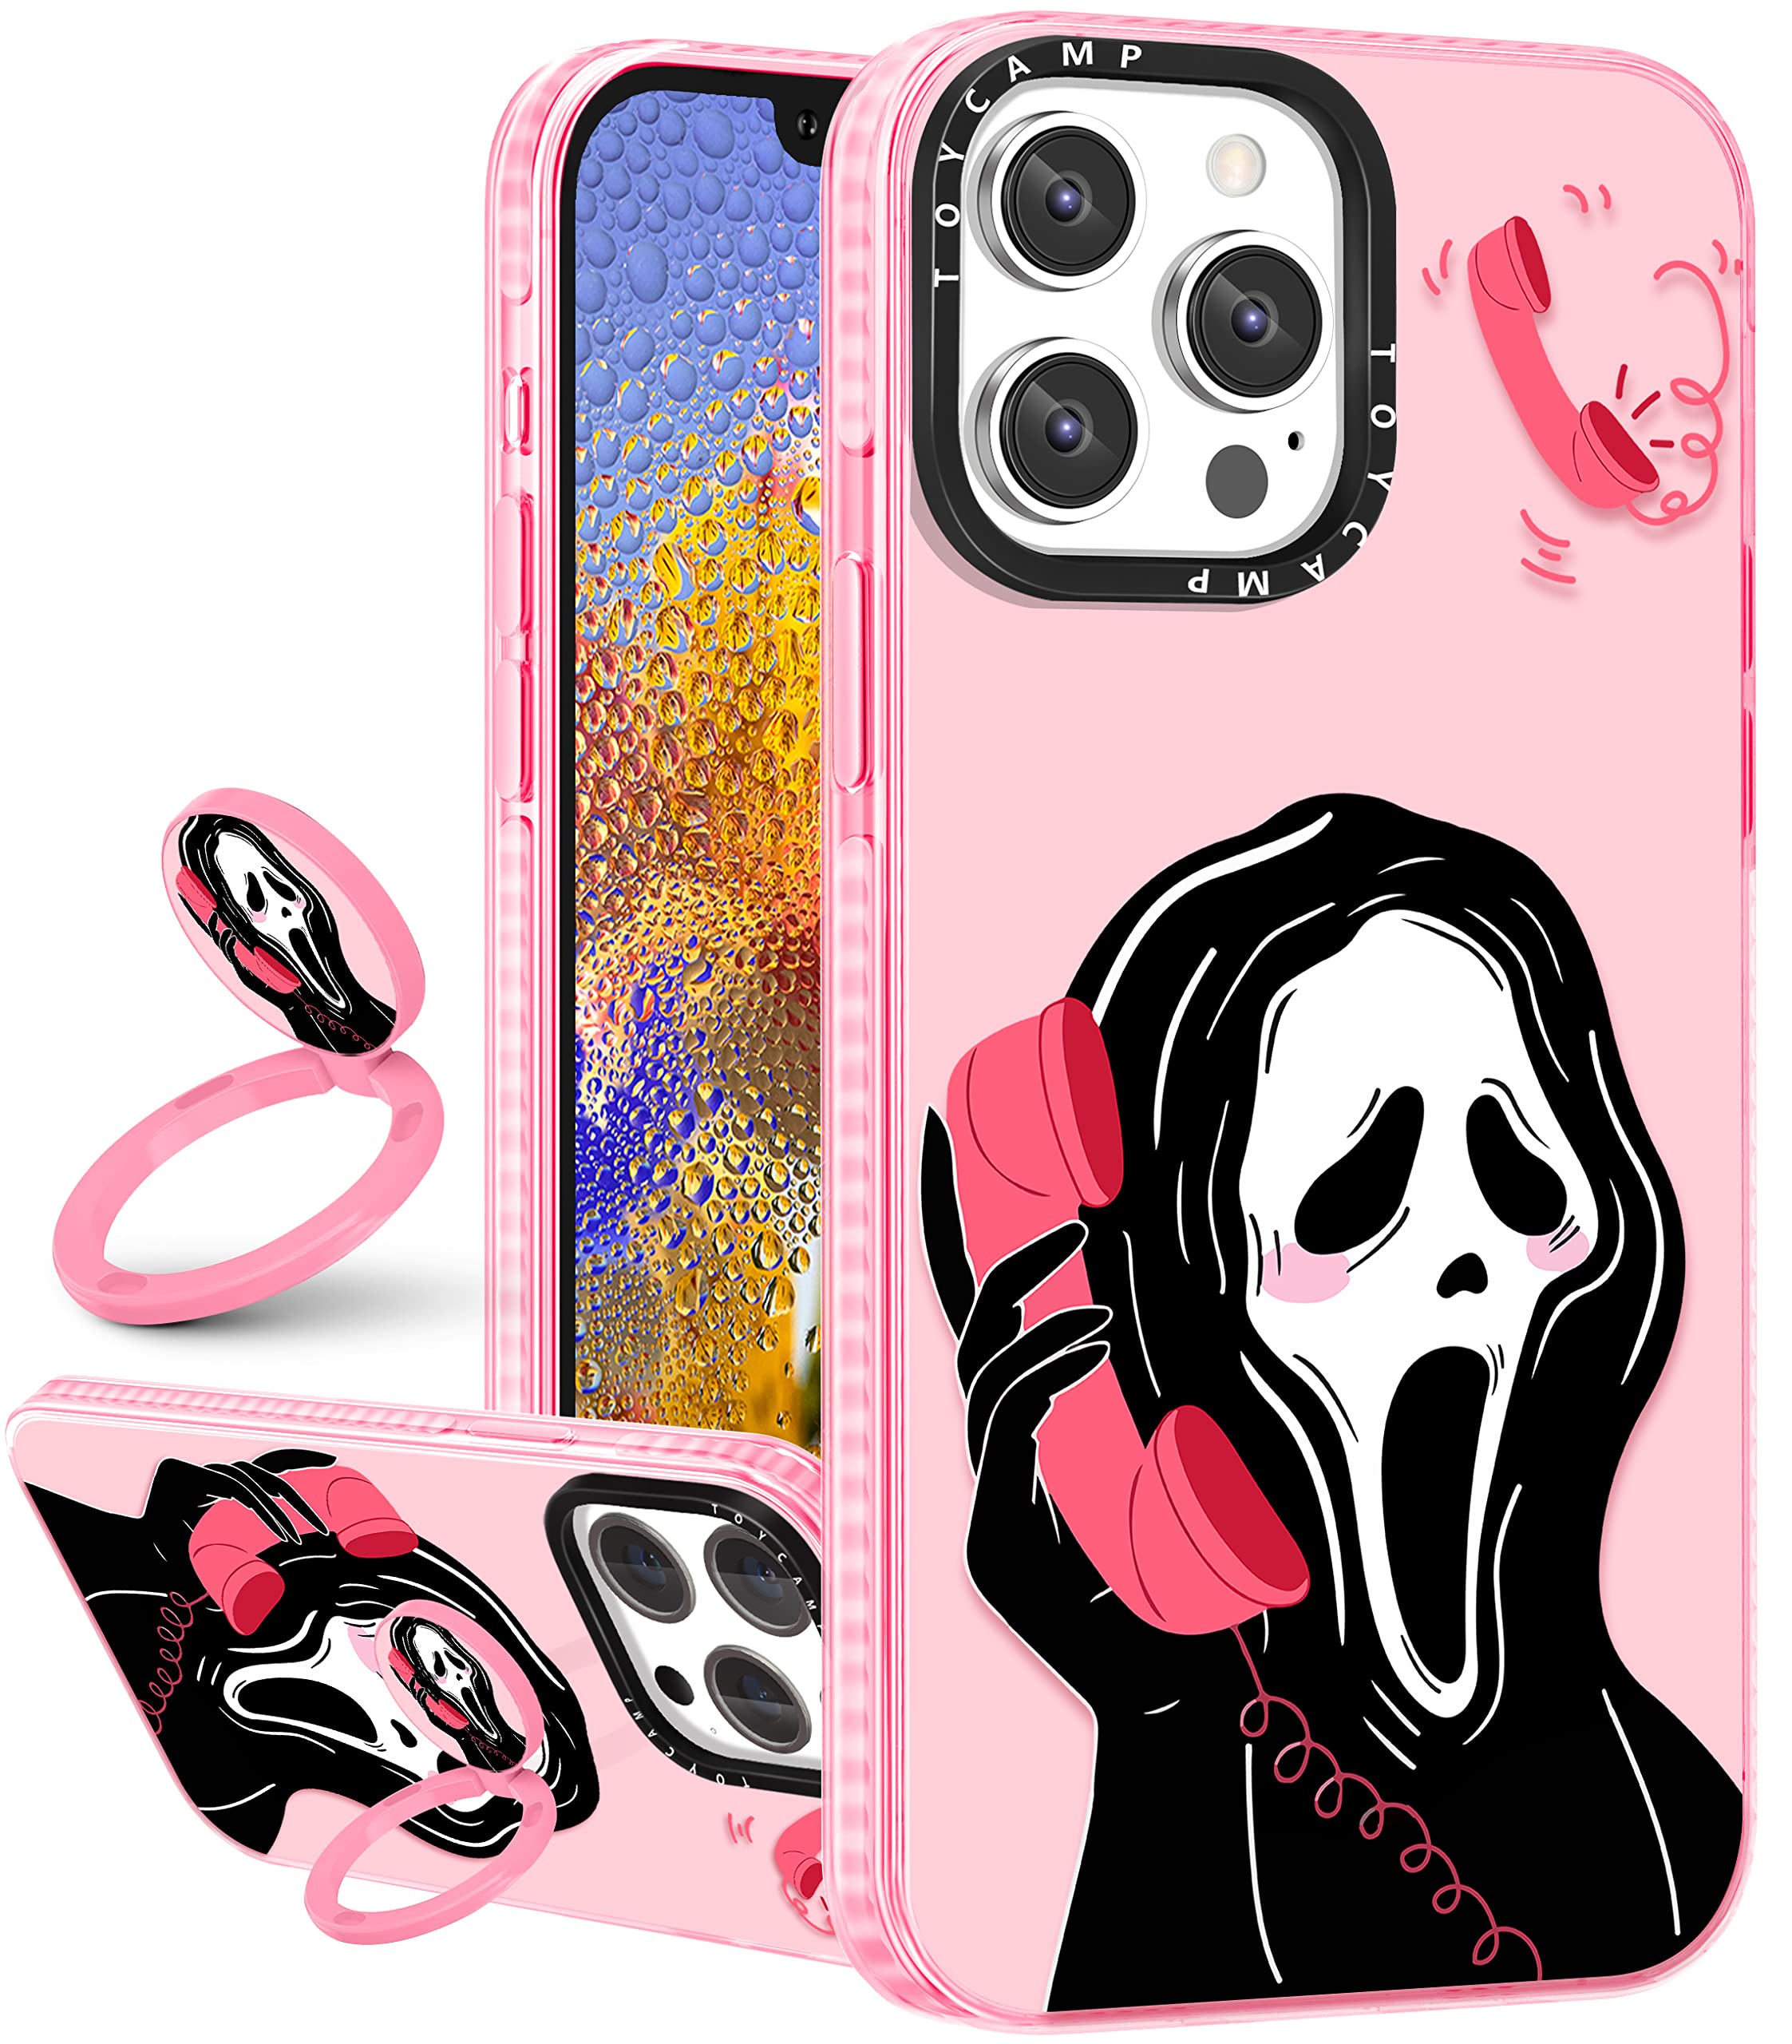 Toycamp for iPhone 12 Pro Max Case for Women, Cute Ghost Design Girls Teens Elegant Print Case with Ring Kickstand Cover for iPhone 12 Pro Max (6.7 Inch)